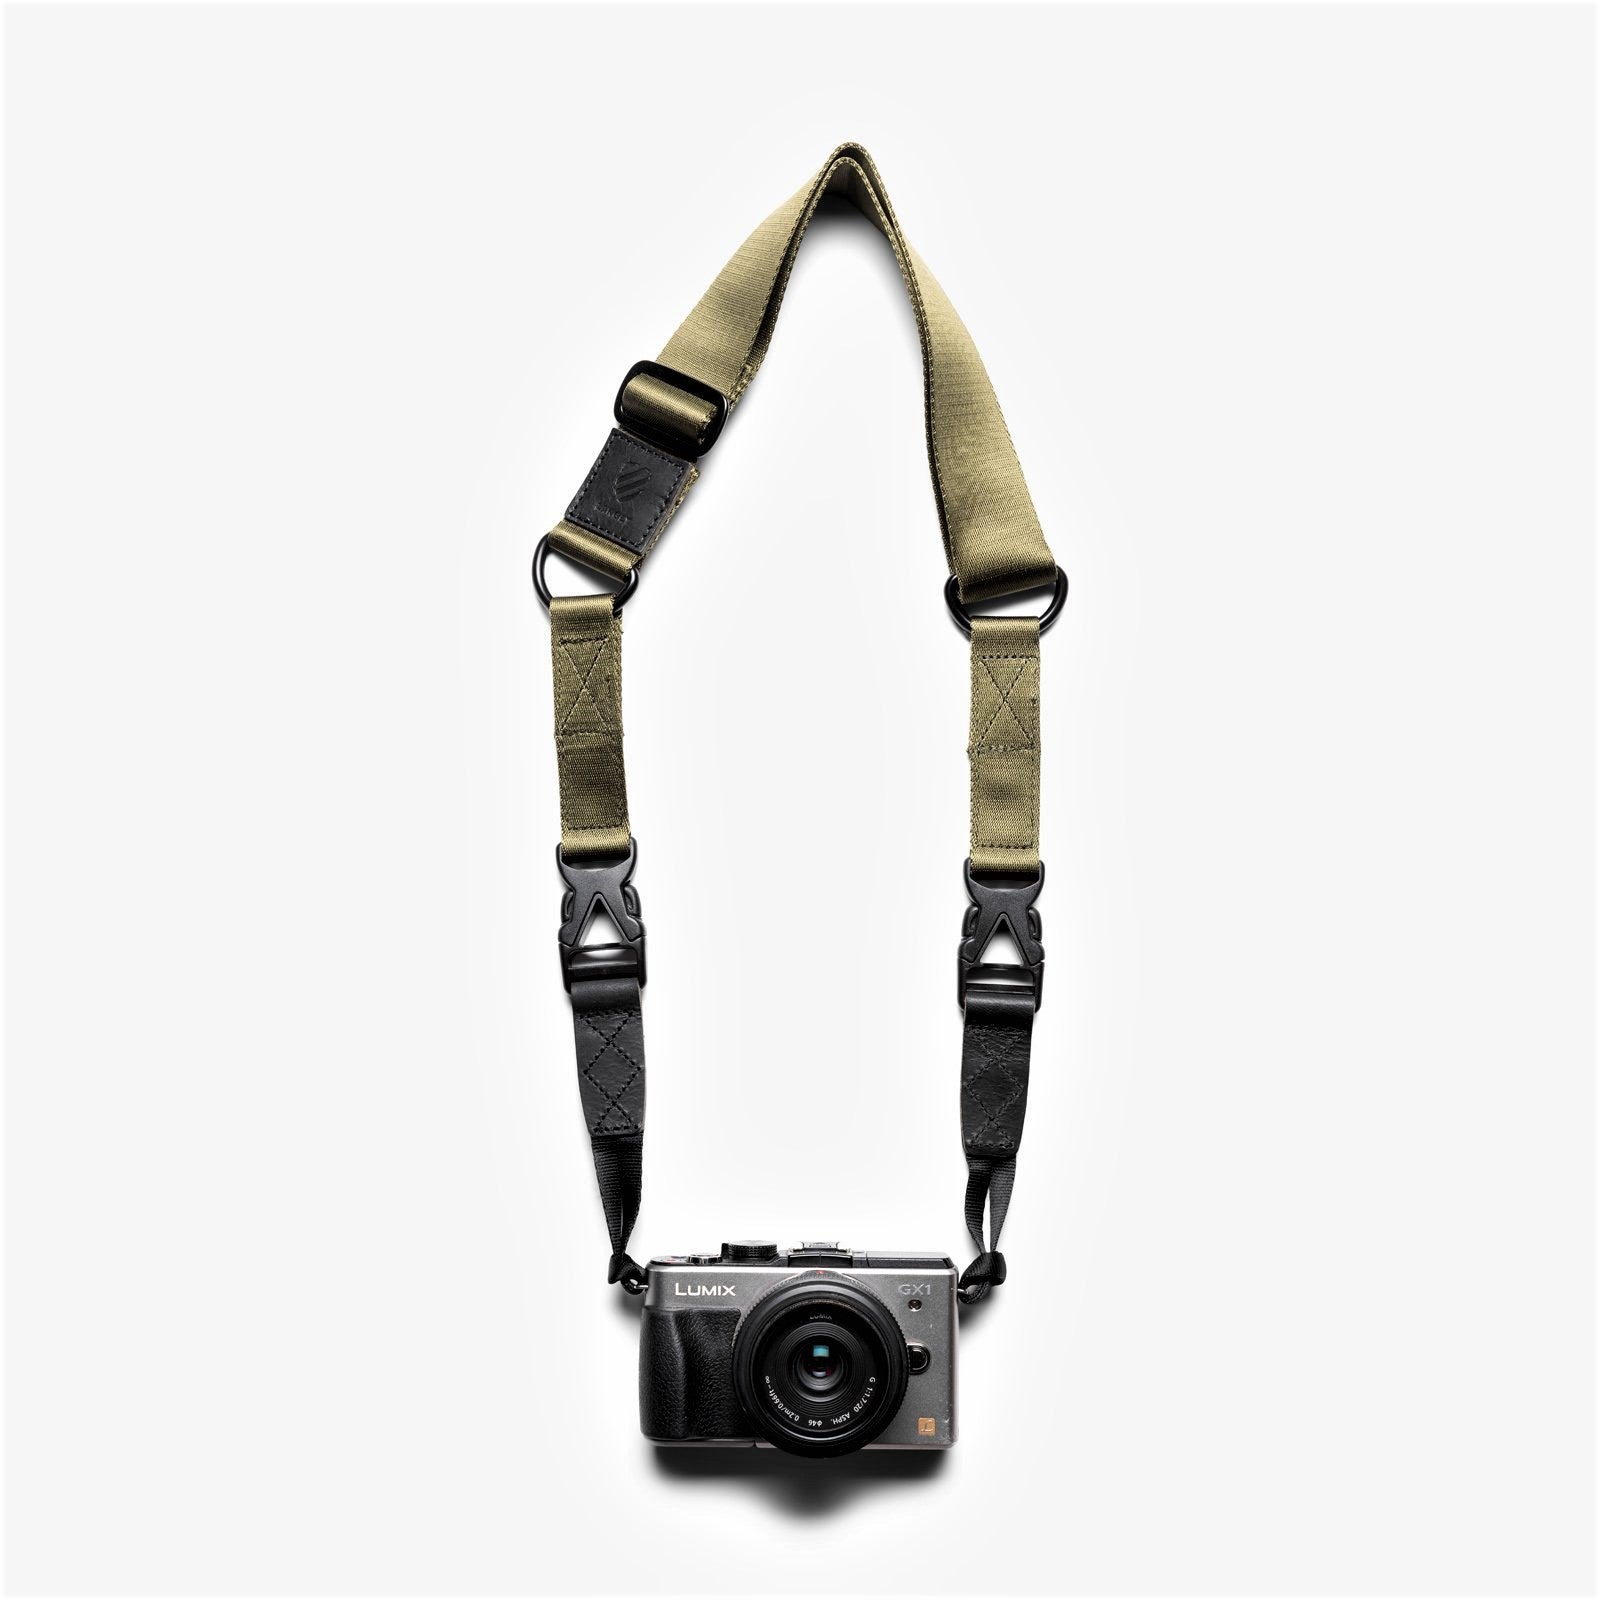 Langly Tactical Camera Strap (Green) with Attached Camera - Not Included